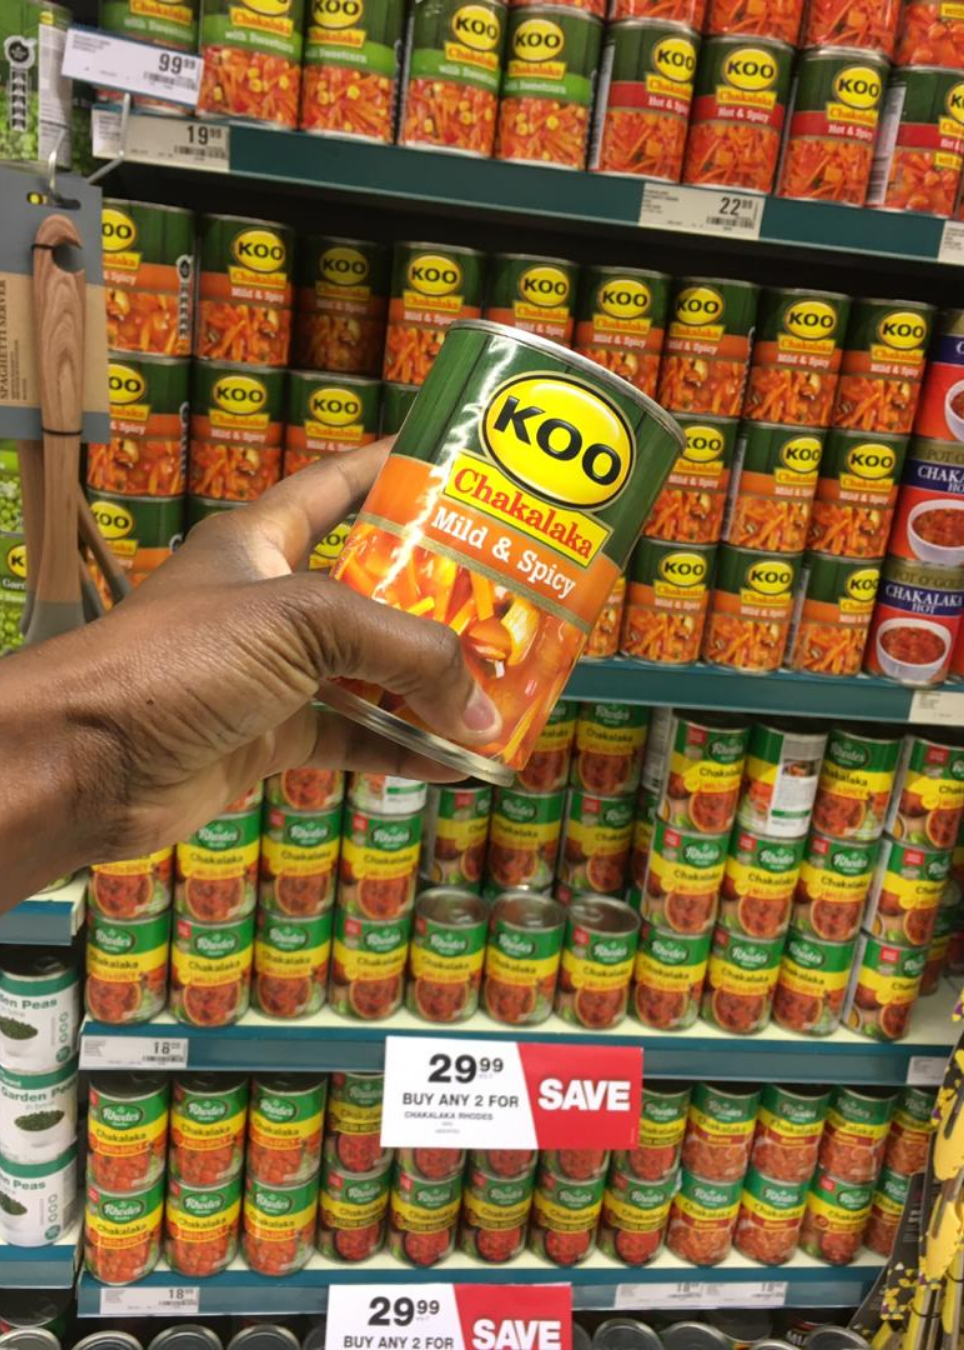 A photo of different cans of chakalaka relish with varying levels of spiciness, ranging from mild to extra hot, on a shelf in a Namibian supermarket.